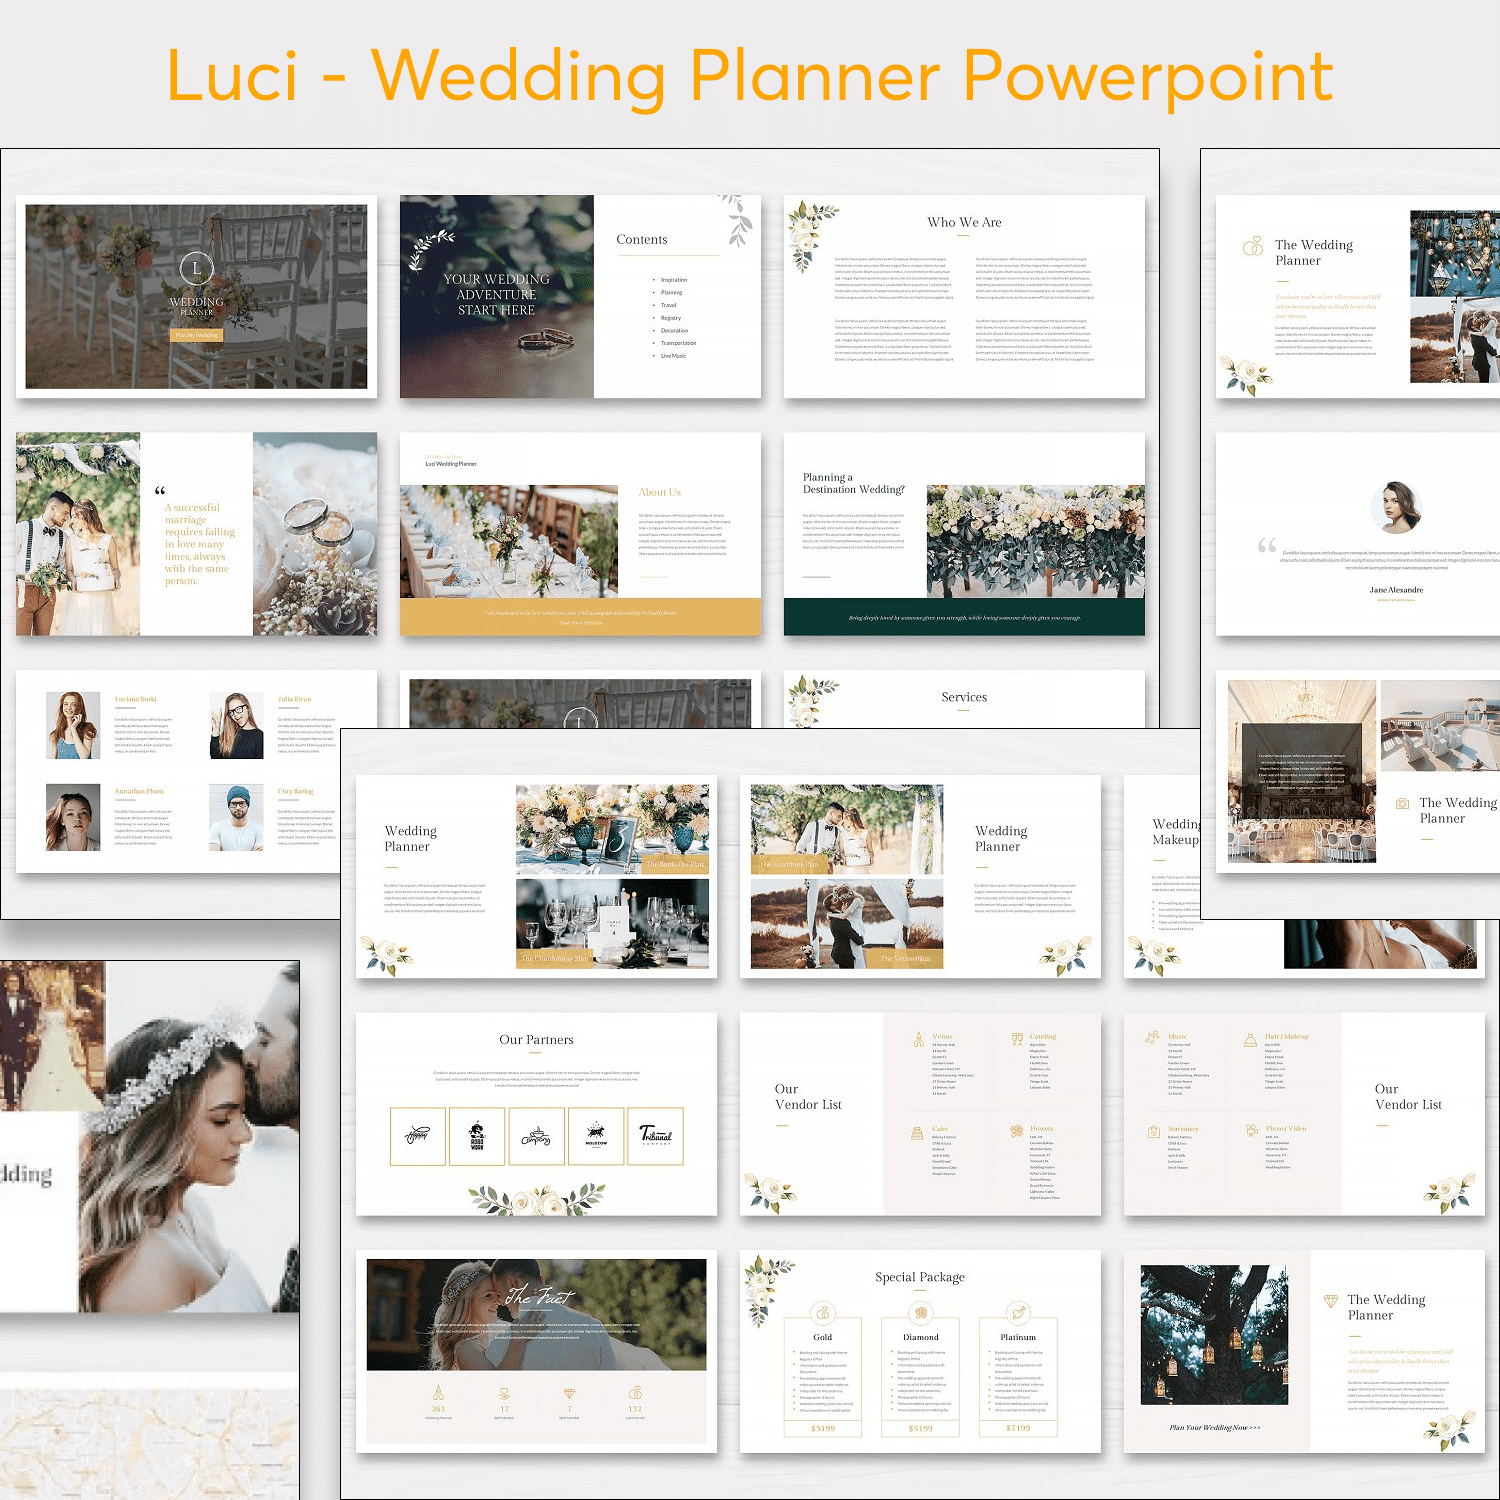 Luci - Wedding Planner Powerpoint cover.